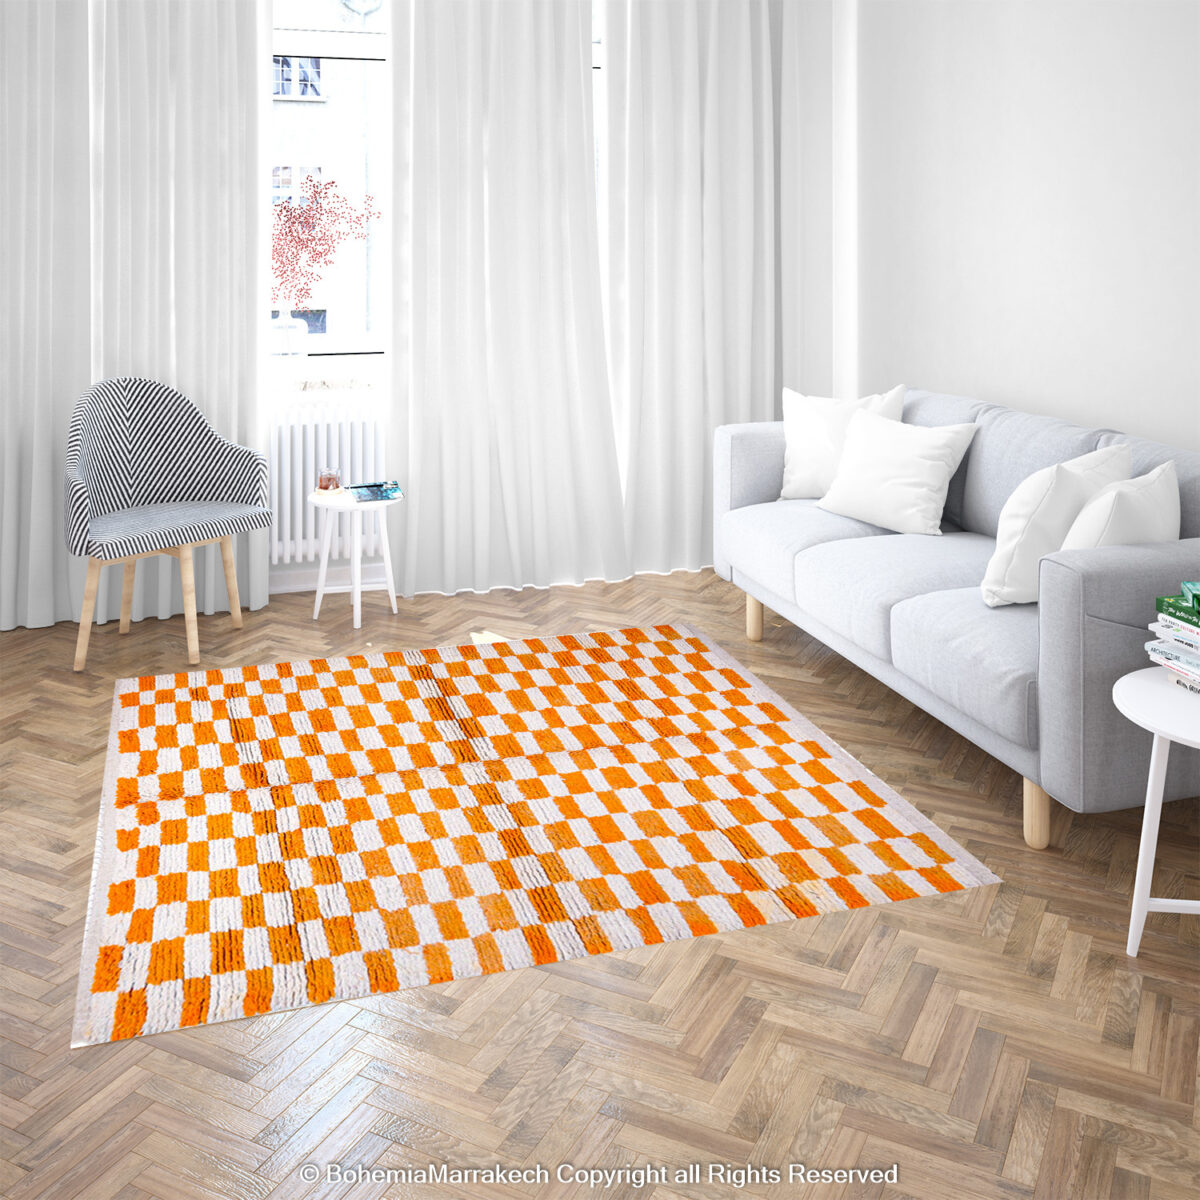 light yellow rug pale yellow rug yellow area rugs 8x10 orange and yellow rug red and yellow rug yellow orange rug orange yellow rug red yellow rug black and white plaid carpet 8x10 area rugs yellow yellow red rug pale yellow carpet red and yellow carpet chris loves julia checkered rug checkered washable rug checker board rug burnt orange checkered rug wayfair checkered rug checkerboard area rug sage checkered rug yellow checkered rug shag checkered rug brown plaid rug sage green checkered rug colorful checkered rug checkered kitchen rug red checkered rug checkered door mat target checkered rug rugs checkered yellow rug ikea green and yellow area rug brown and yellow rug blue grey yellow rug blue gray yellow rug yellow brown rug blue grey and yellow rug grey blue and yellow rug brown yellow rug yellow green area rugs yellow blue gray rug gray blue yellow rug green yellow area rug blue gray and yellow rug yellow grey and blue rug yellow gray blue rug yellow carpet ikea gray yellow blue rug brown and yellow carpet gray blue and yellow rug